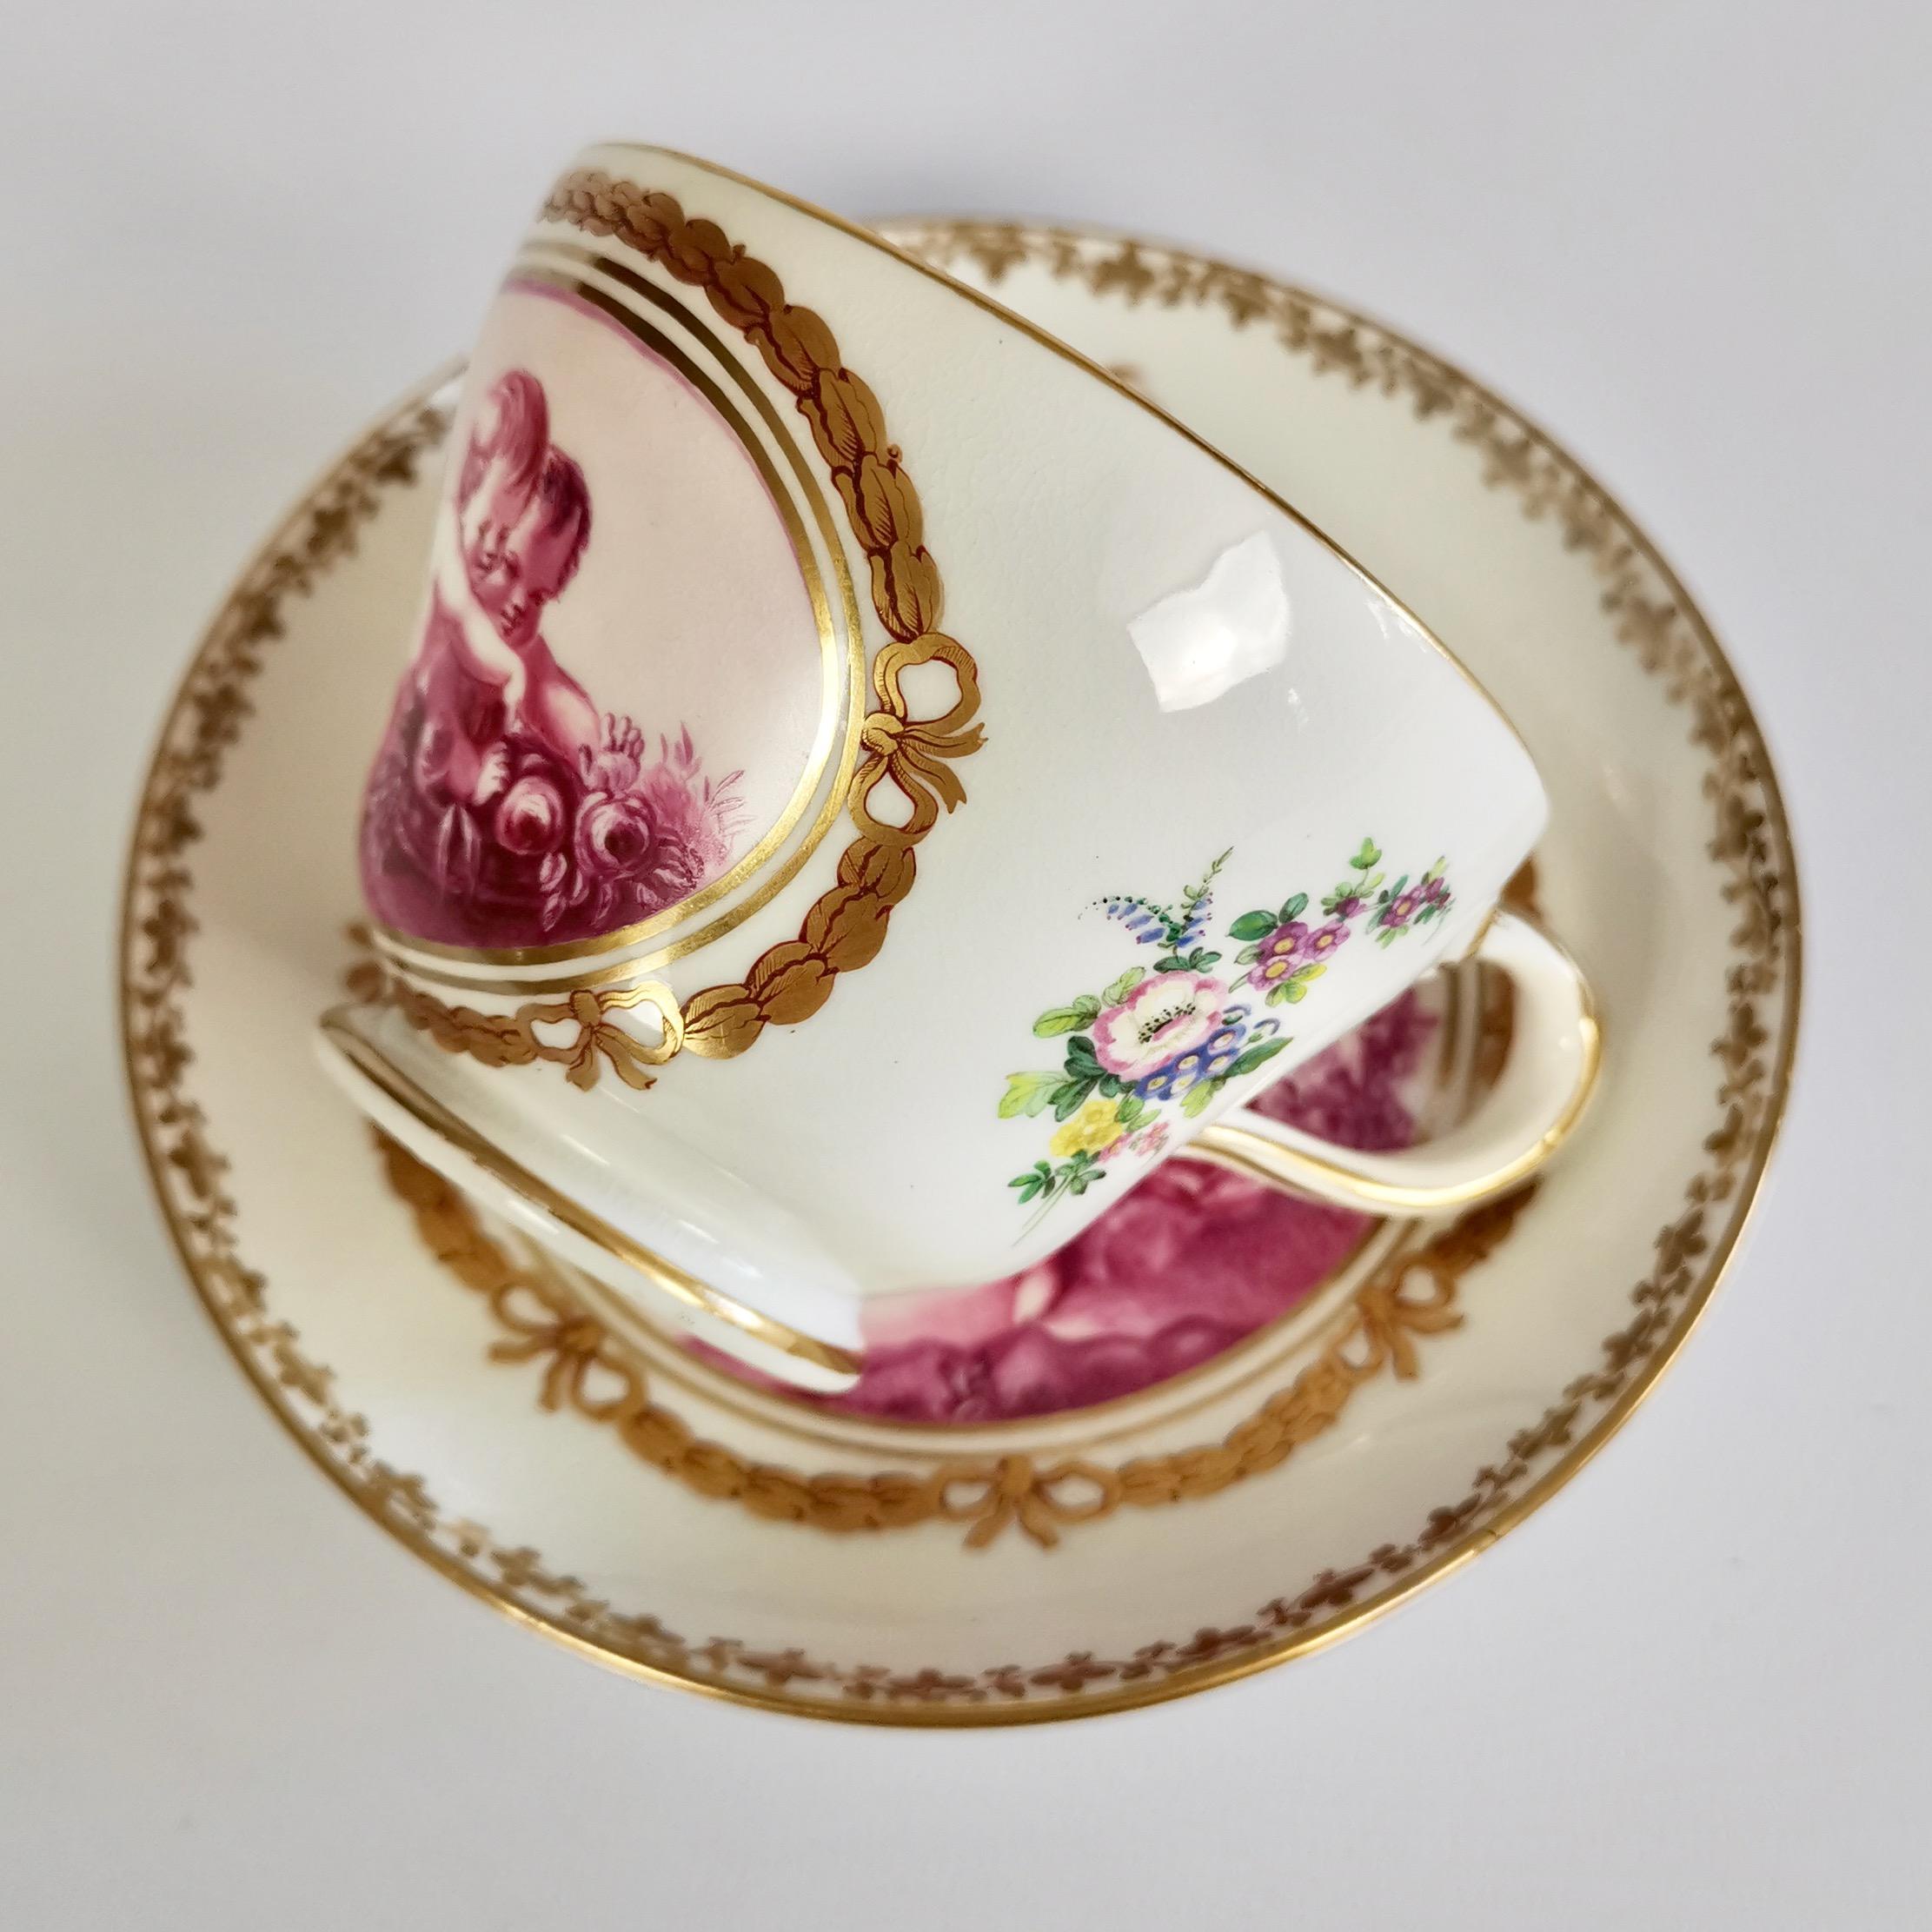 Kerr & Binns Worcester Porcelain Cup and Saucer, Puce Putti Playing, circa 1855 5